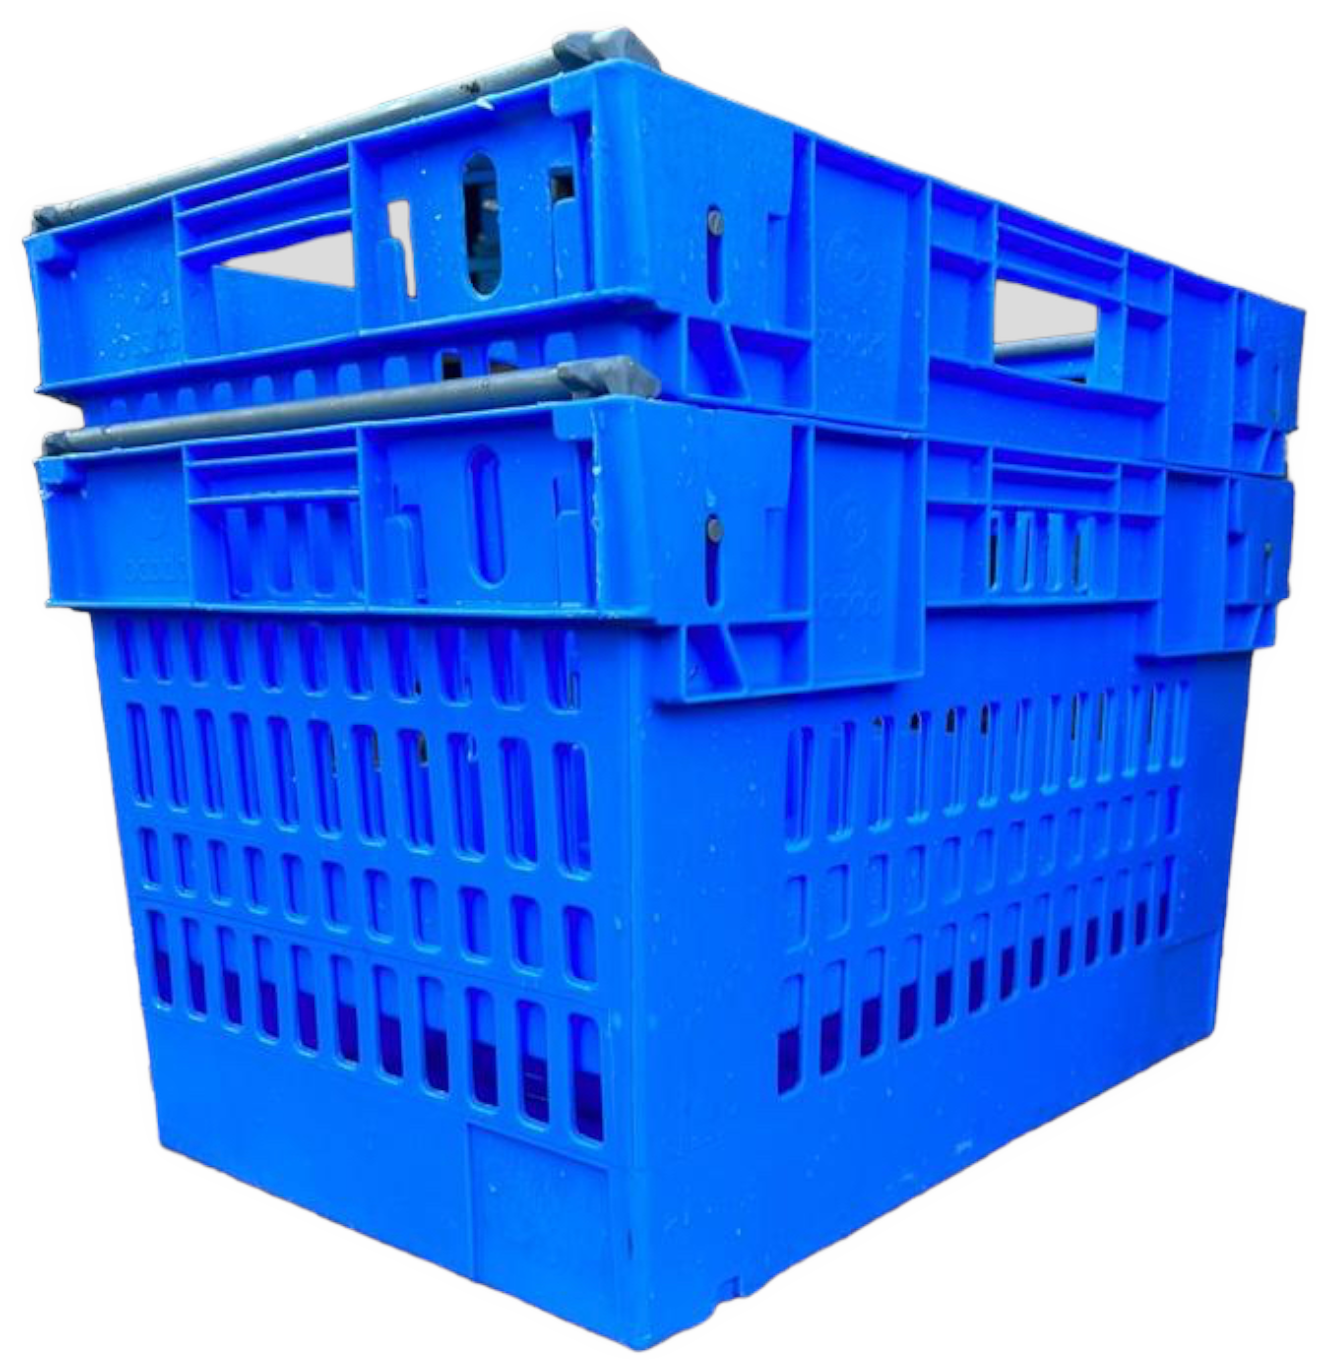 UK Suppliers Of 400x300x300 Blue Lidded Container (28 Ltr) For Agricultural Industry